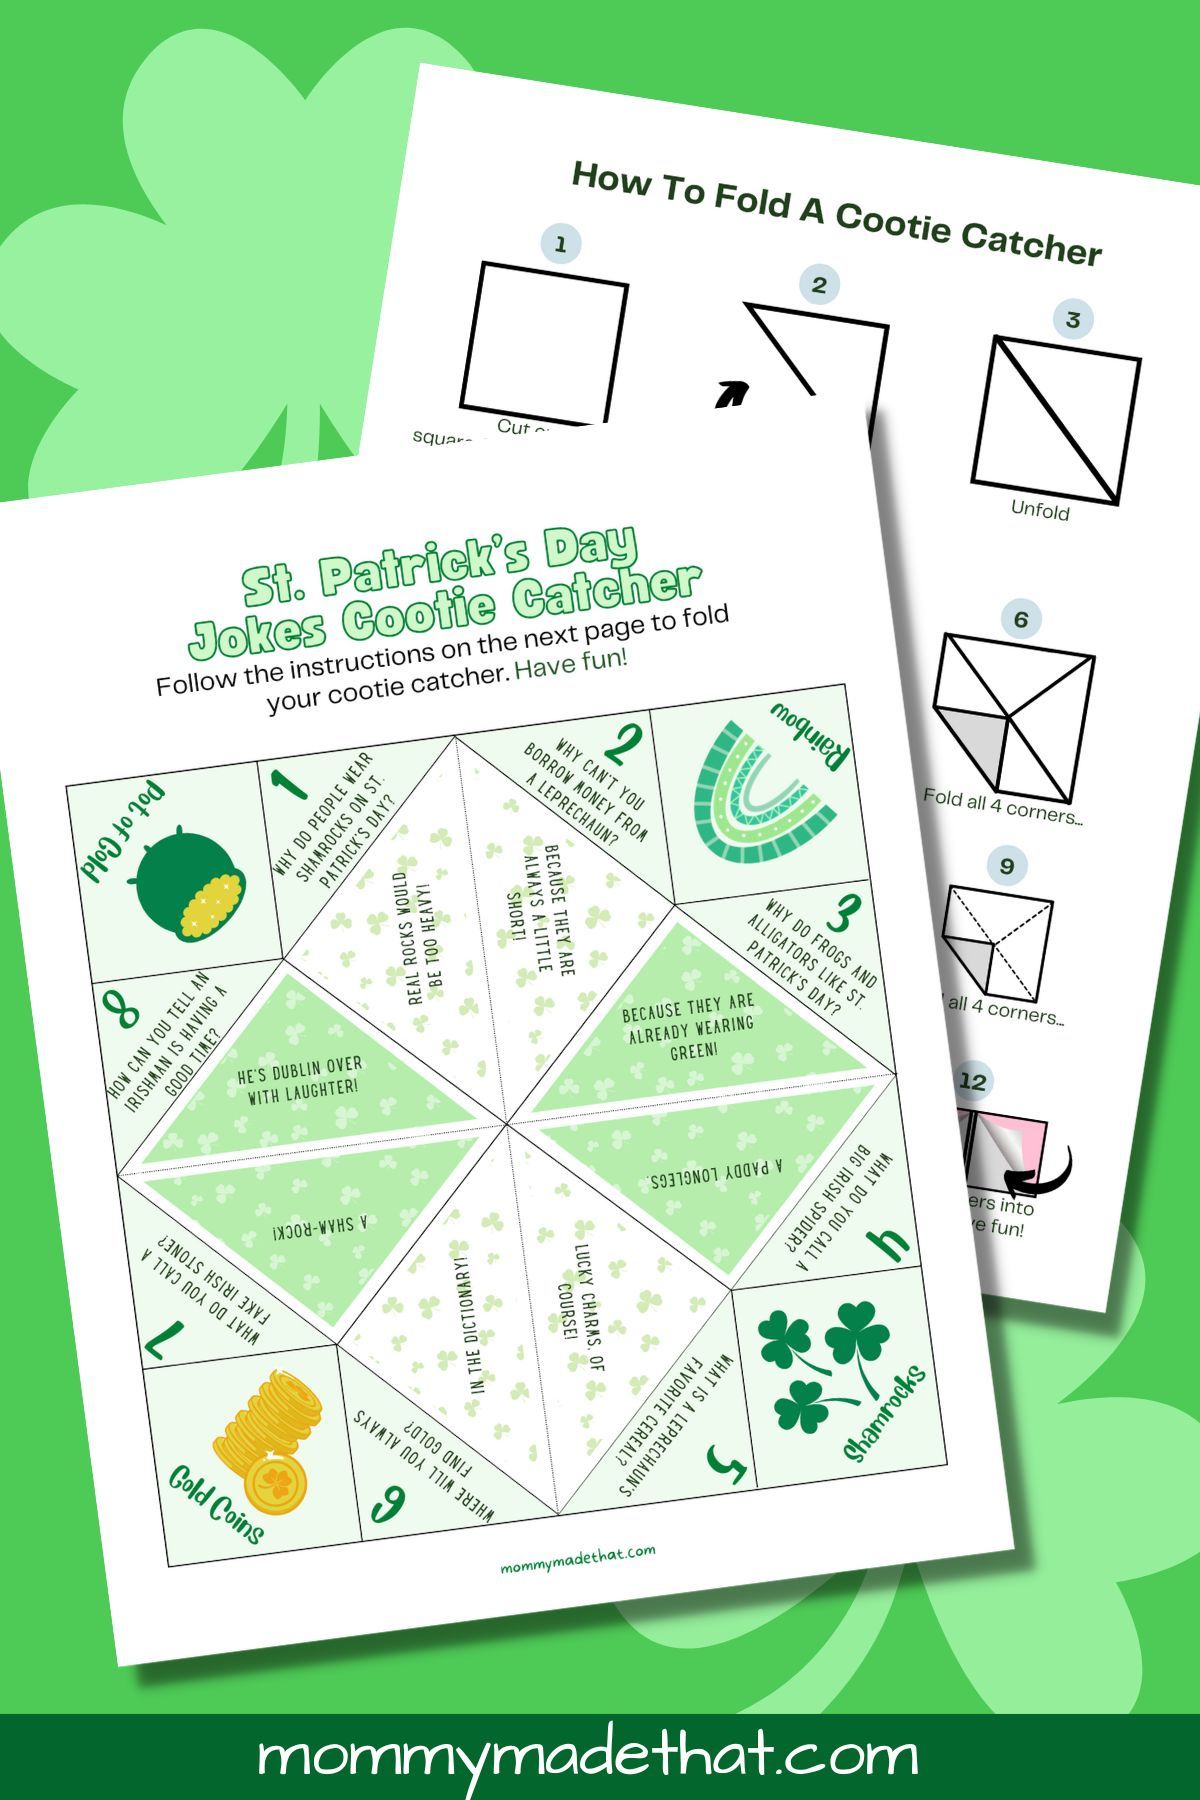 St patty's day cootie catcher printable